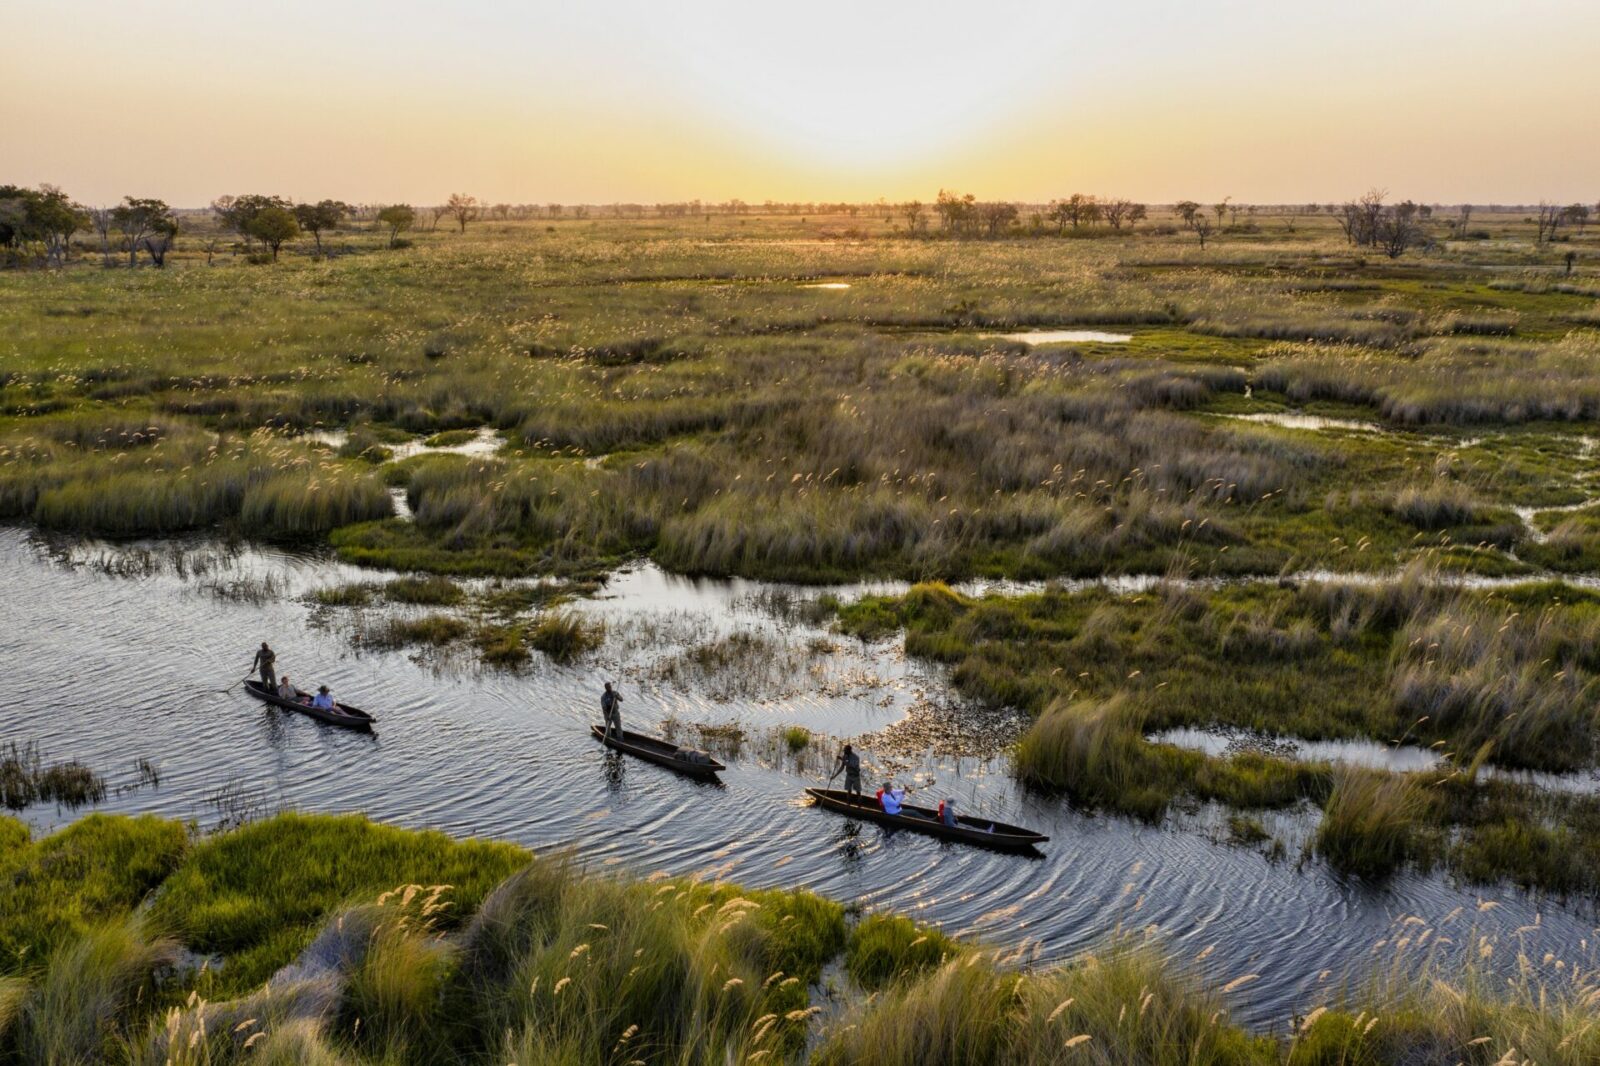 Image of 3 canoes holding guests and guides exploring the  Okavango Delta in Botswana. The river has light ripples and the bush is visible on either side of the water. Courtesy of Natural Selection | TrueAfrica | Blog | Natural Selection